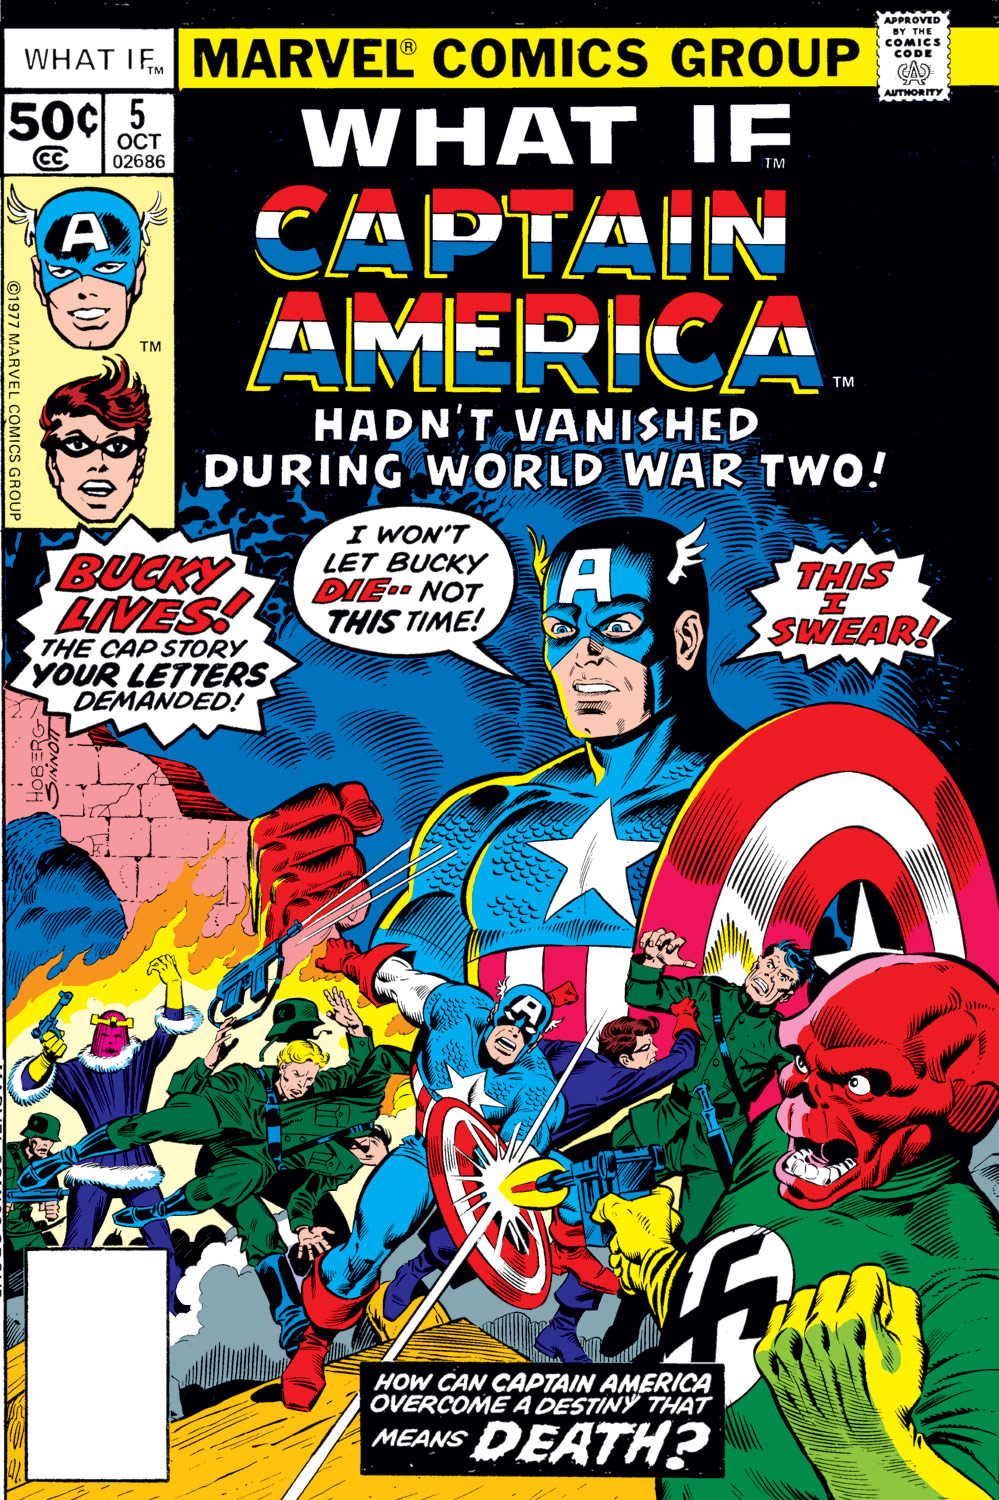 What If? (1977) issue 5 - Captain America hadn't vanished during World War Two - Page 1